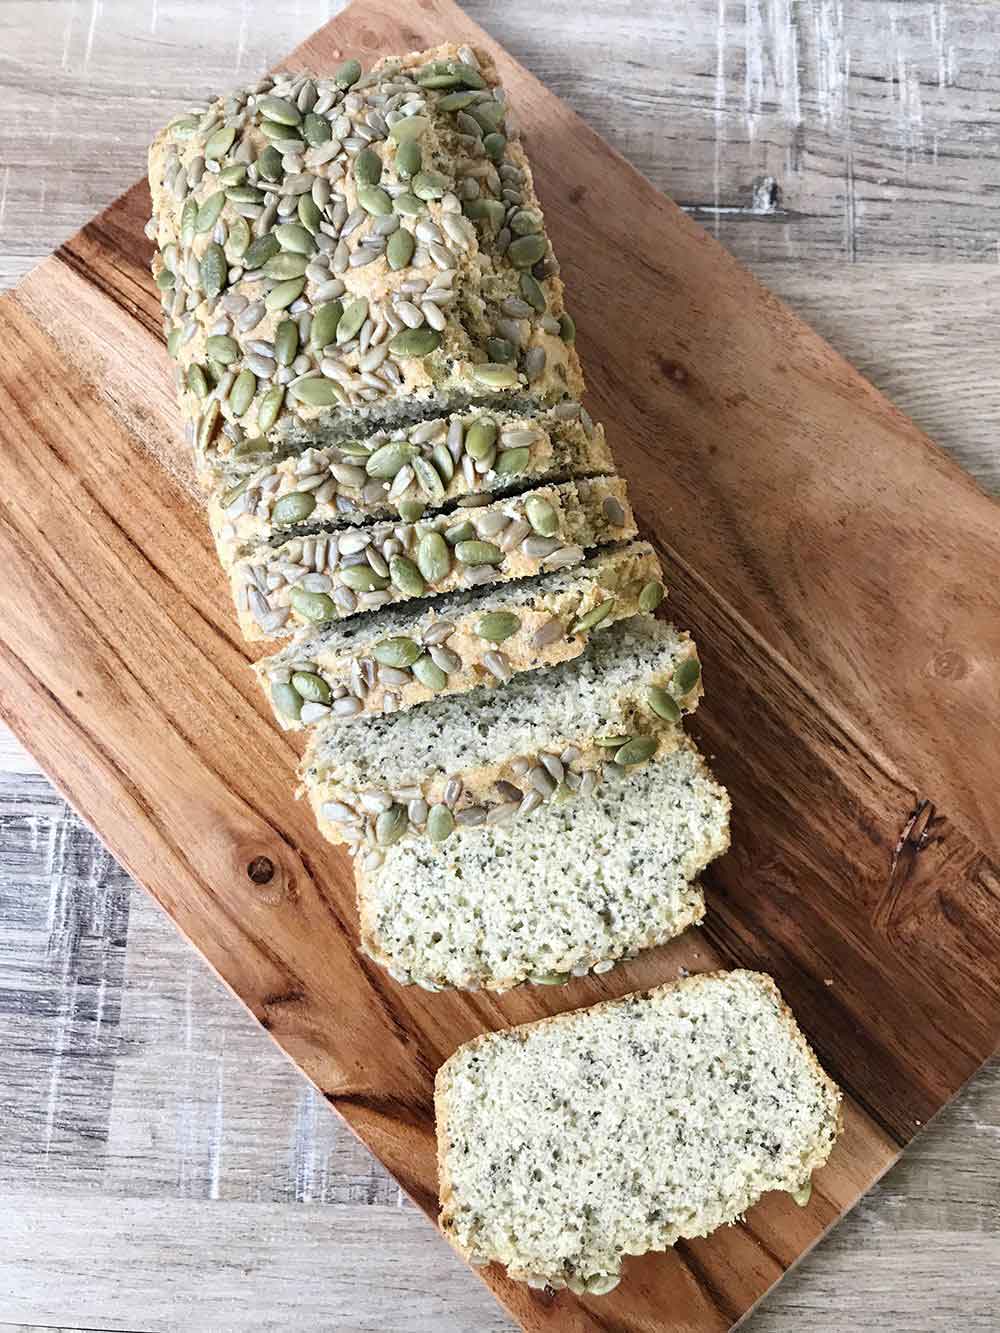 Keto 3 seed bread slices are on a chopping board.